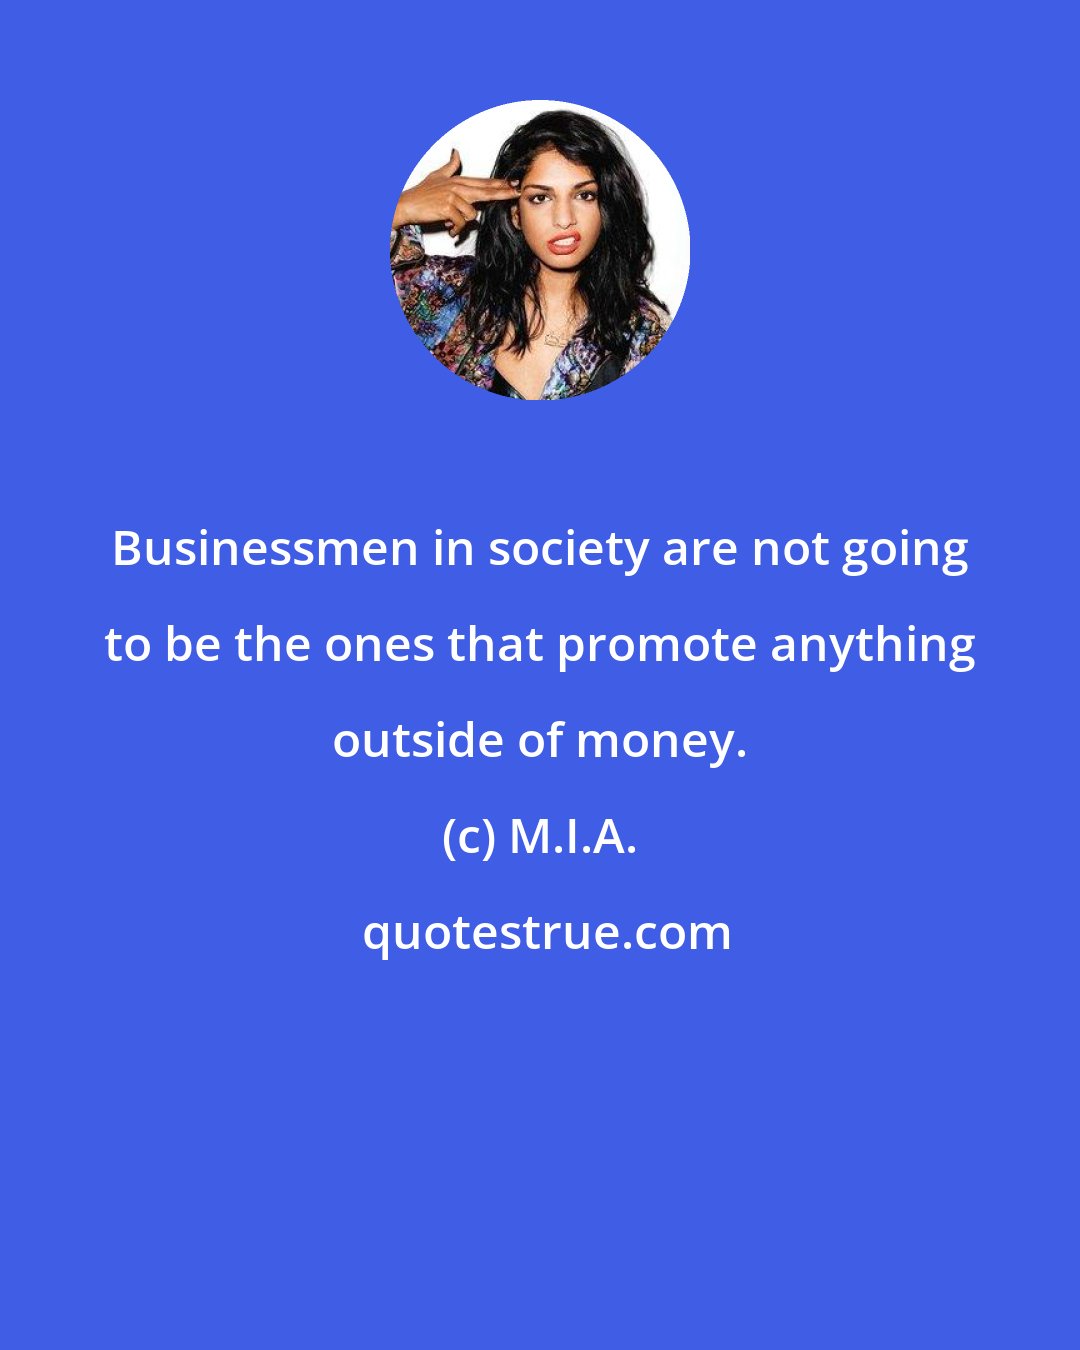 M.I.A.: Businessmen in society are not going to be the ones that promote anything outside of money.